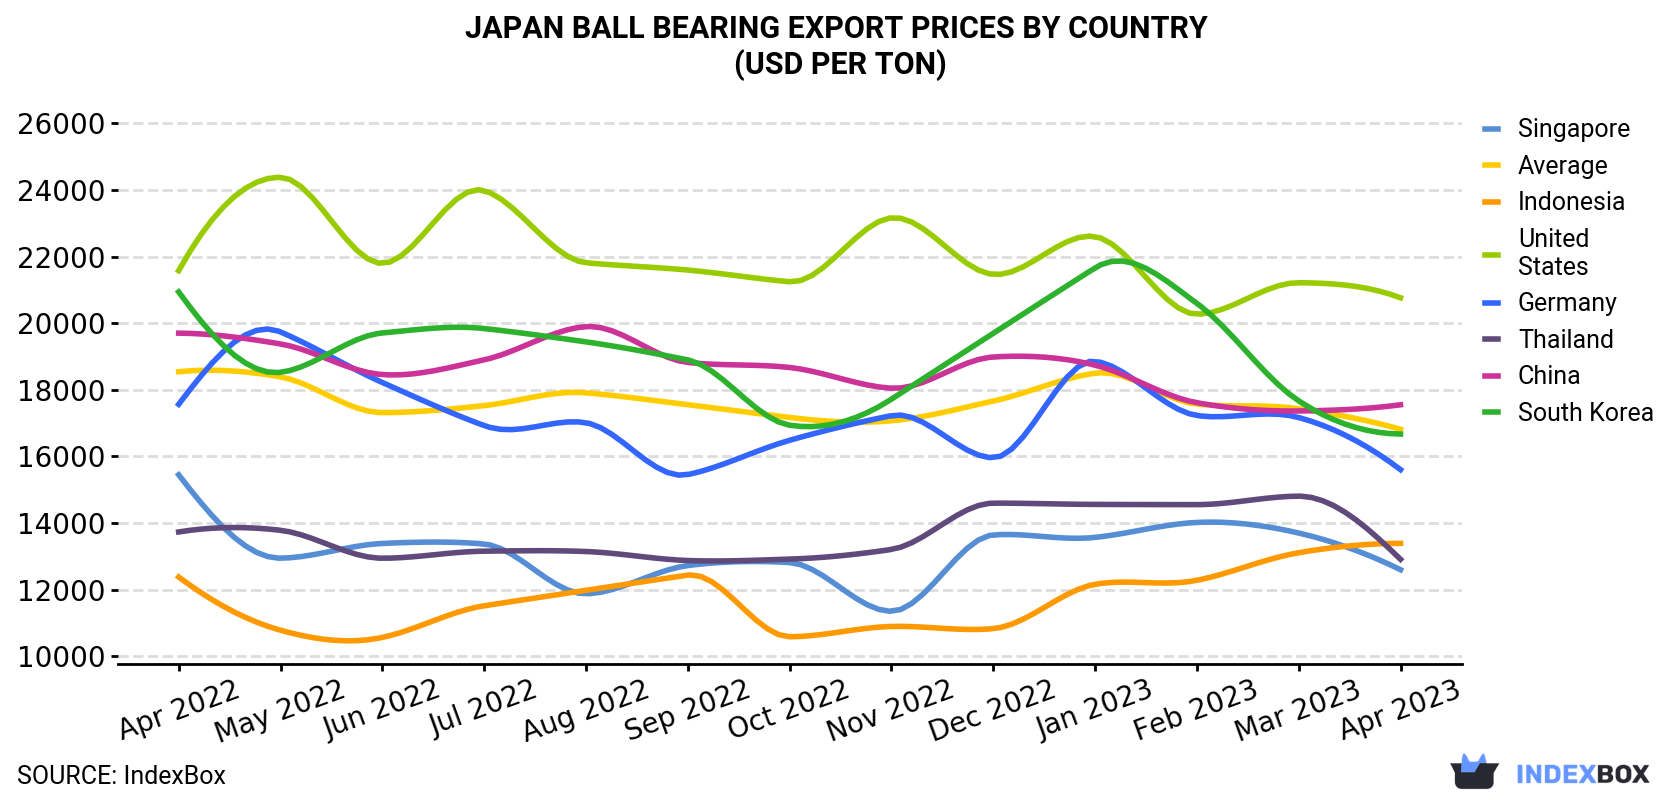 Japan Ball Bearing Export Prices By Country (USD Per Ton)